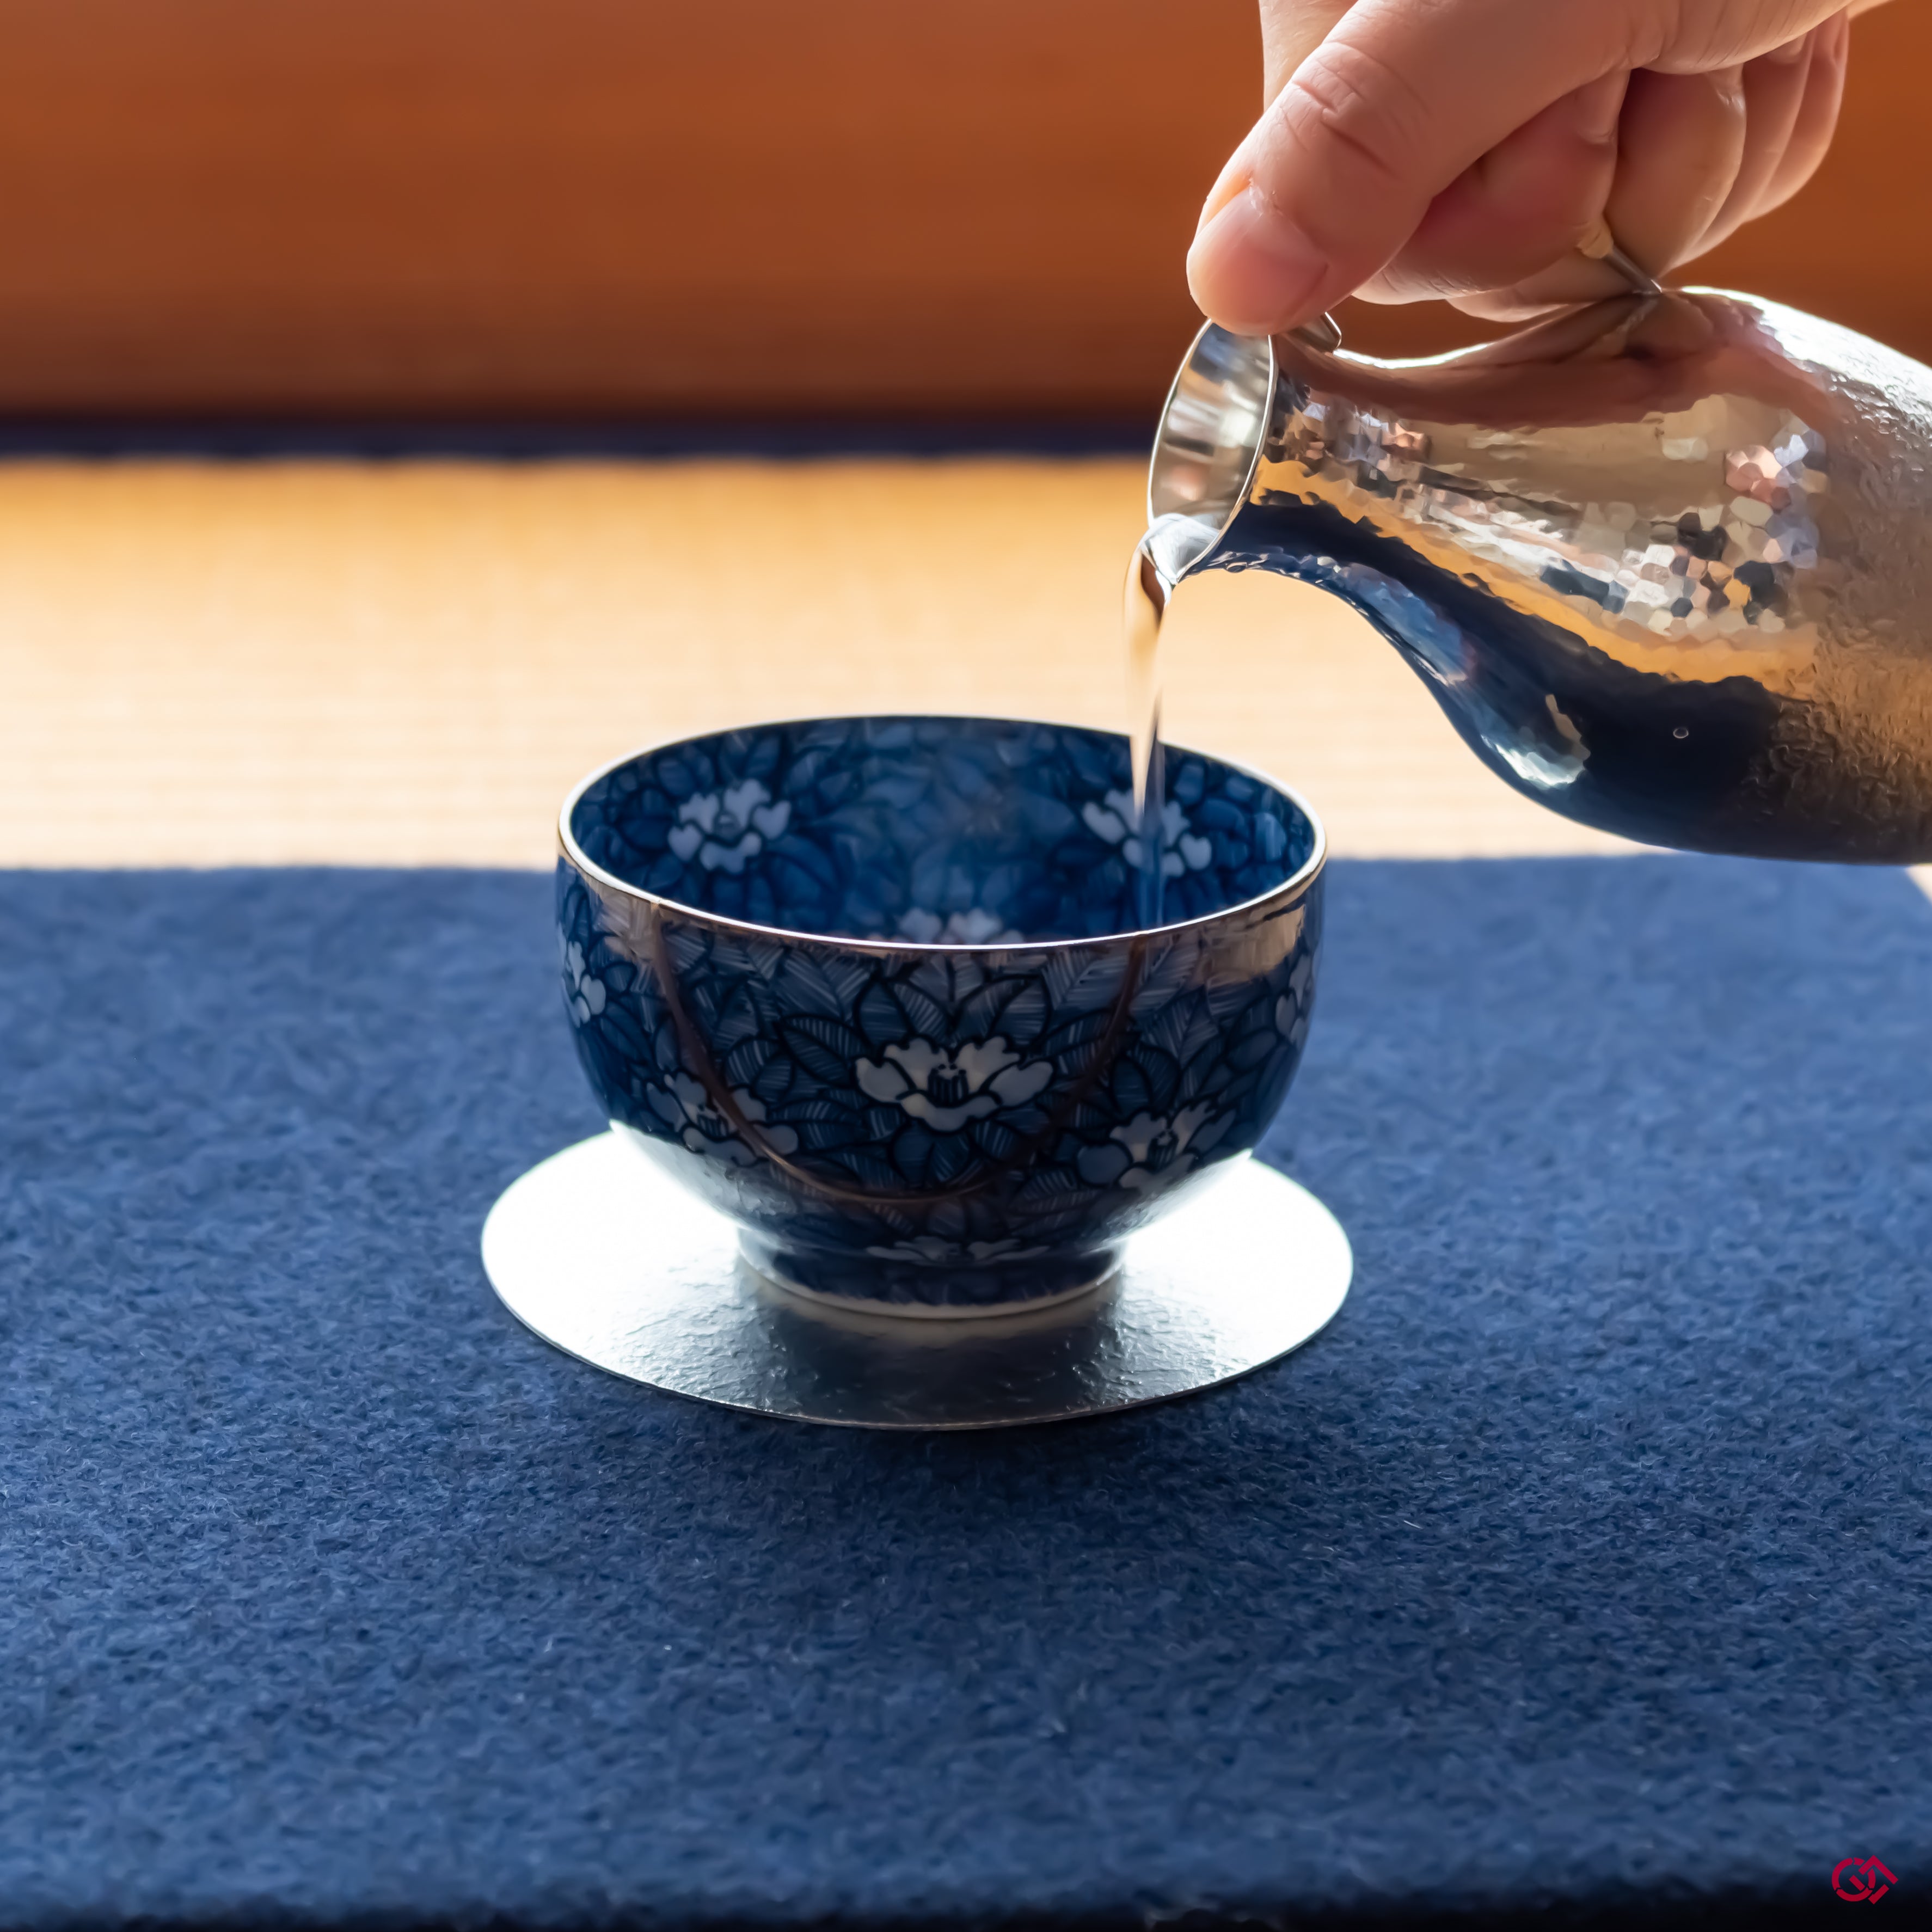 Photo of an authentic Kintsugi pottery piece being used in a real-world setting, such as a cup of sake being poured into a Kintsugi cup